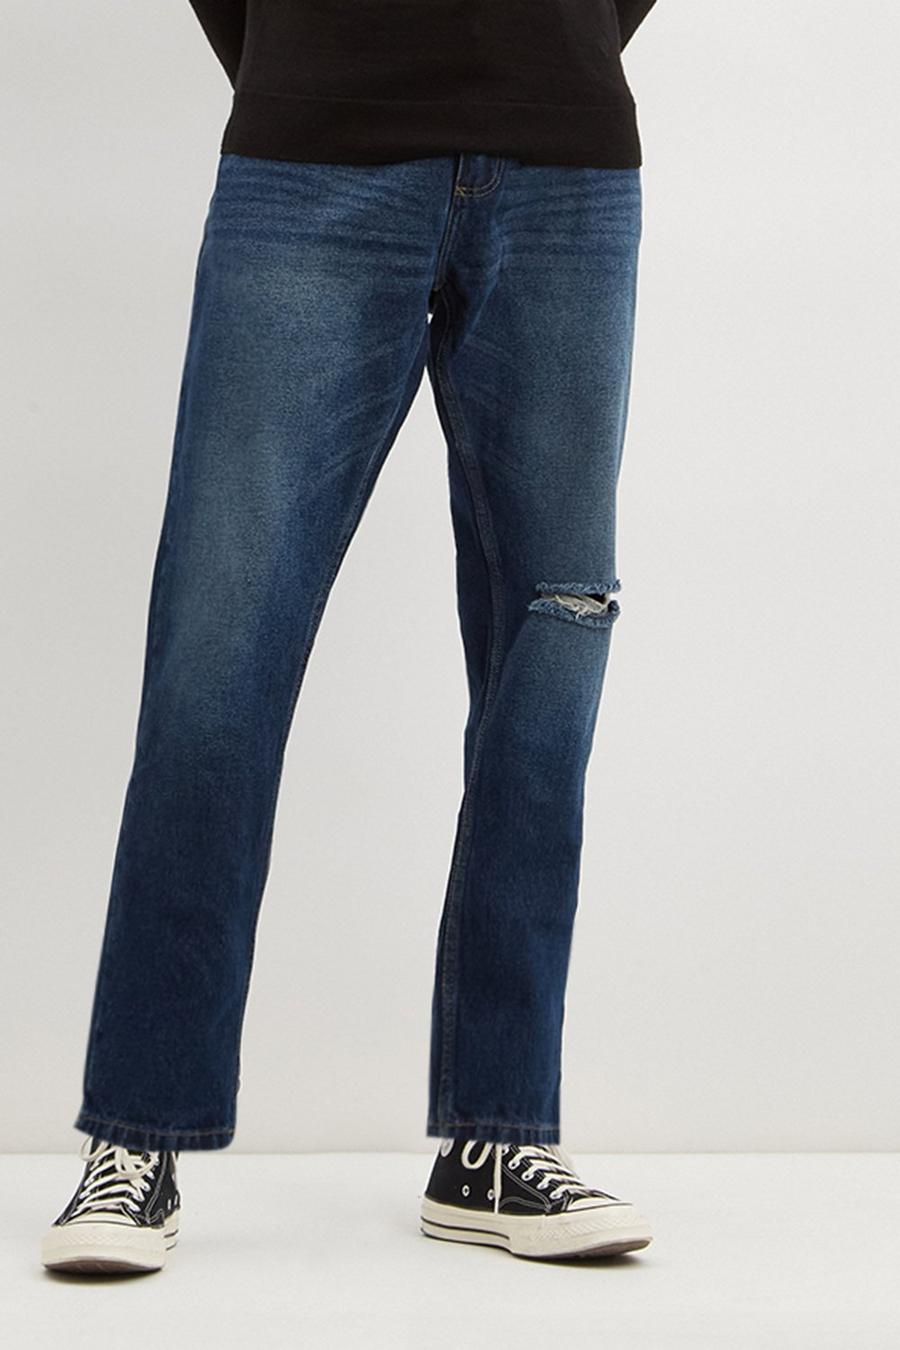 Loose Fit Tapered Dark Blue Rip Jeans